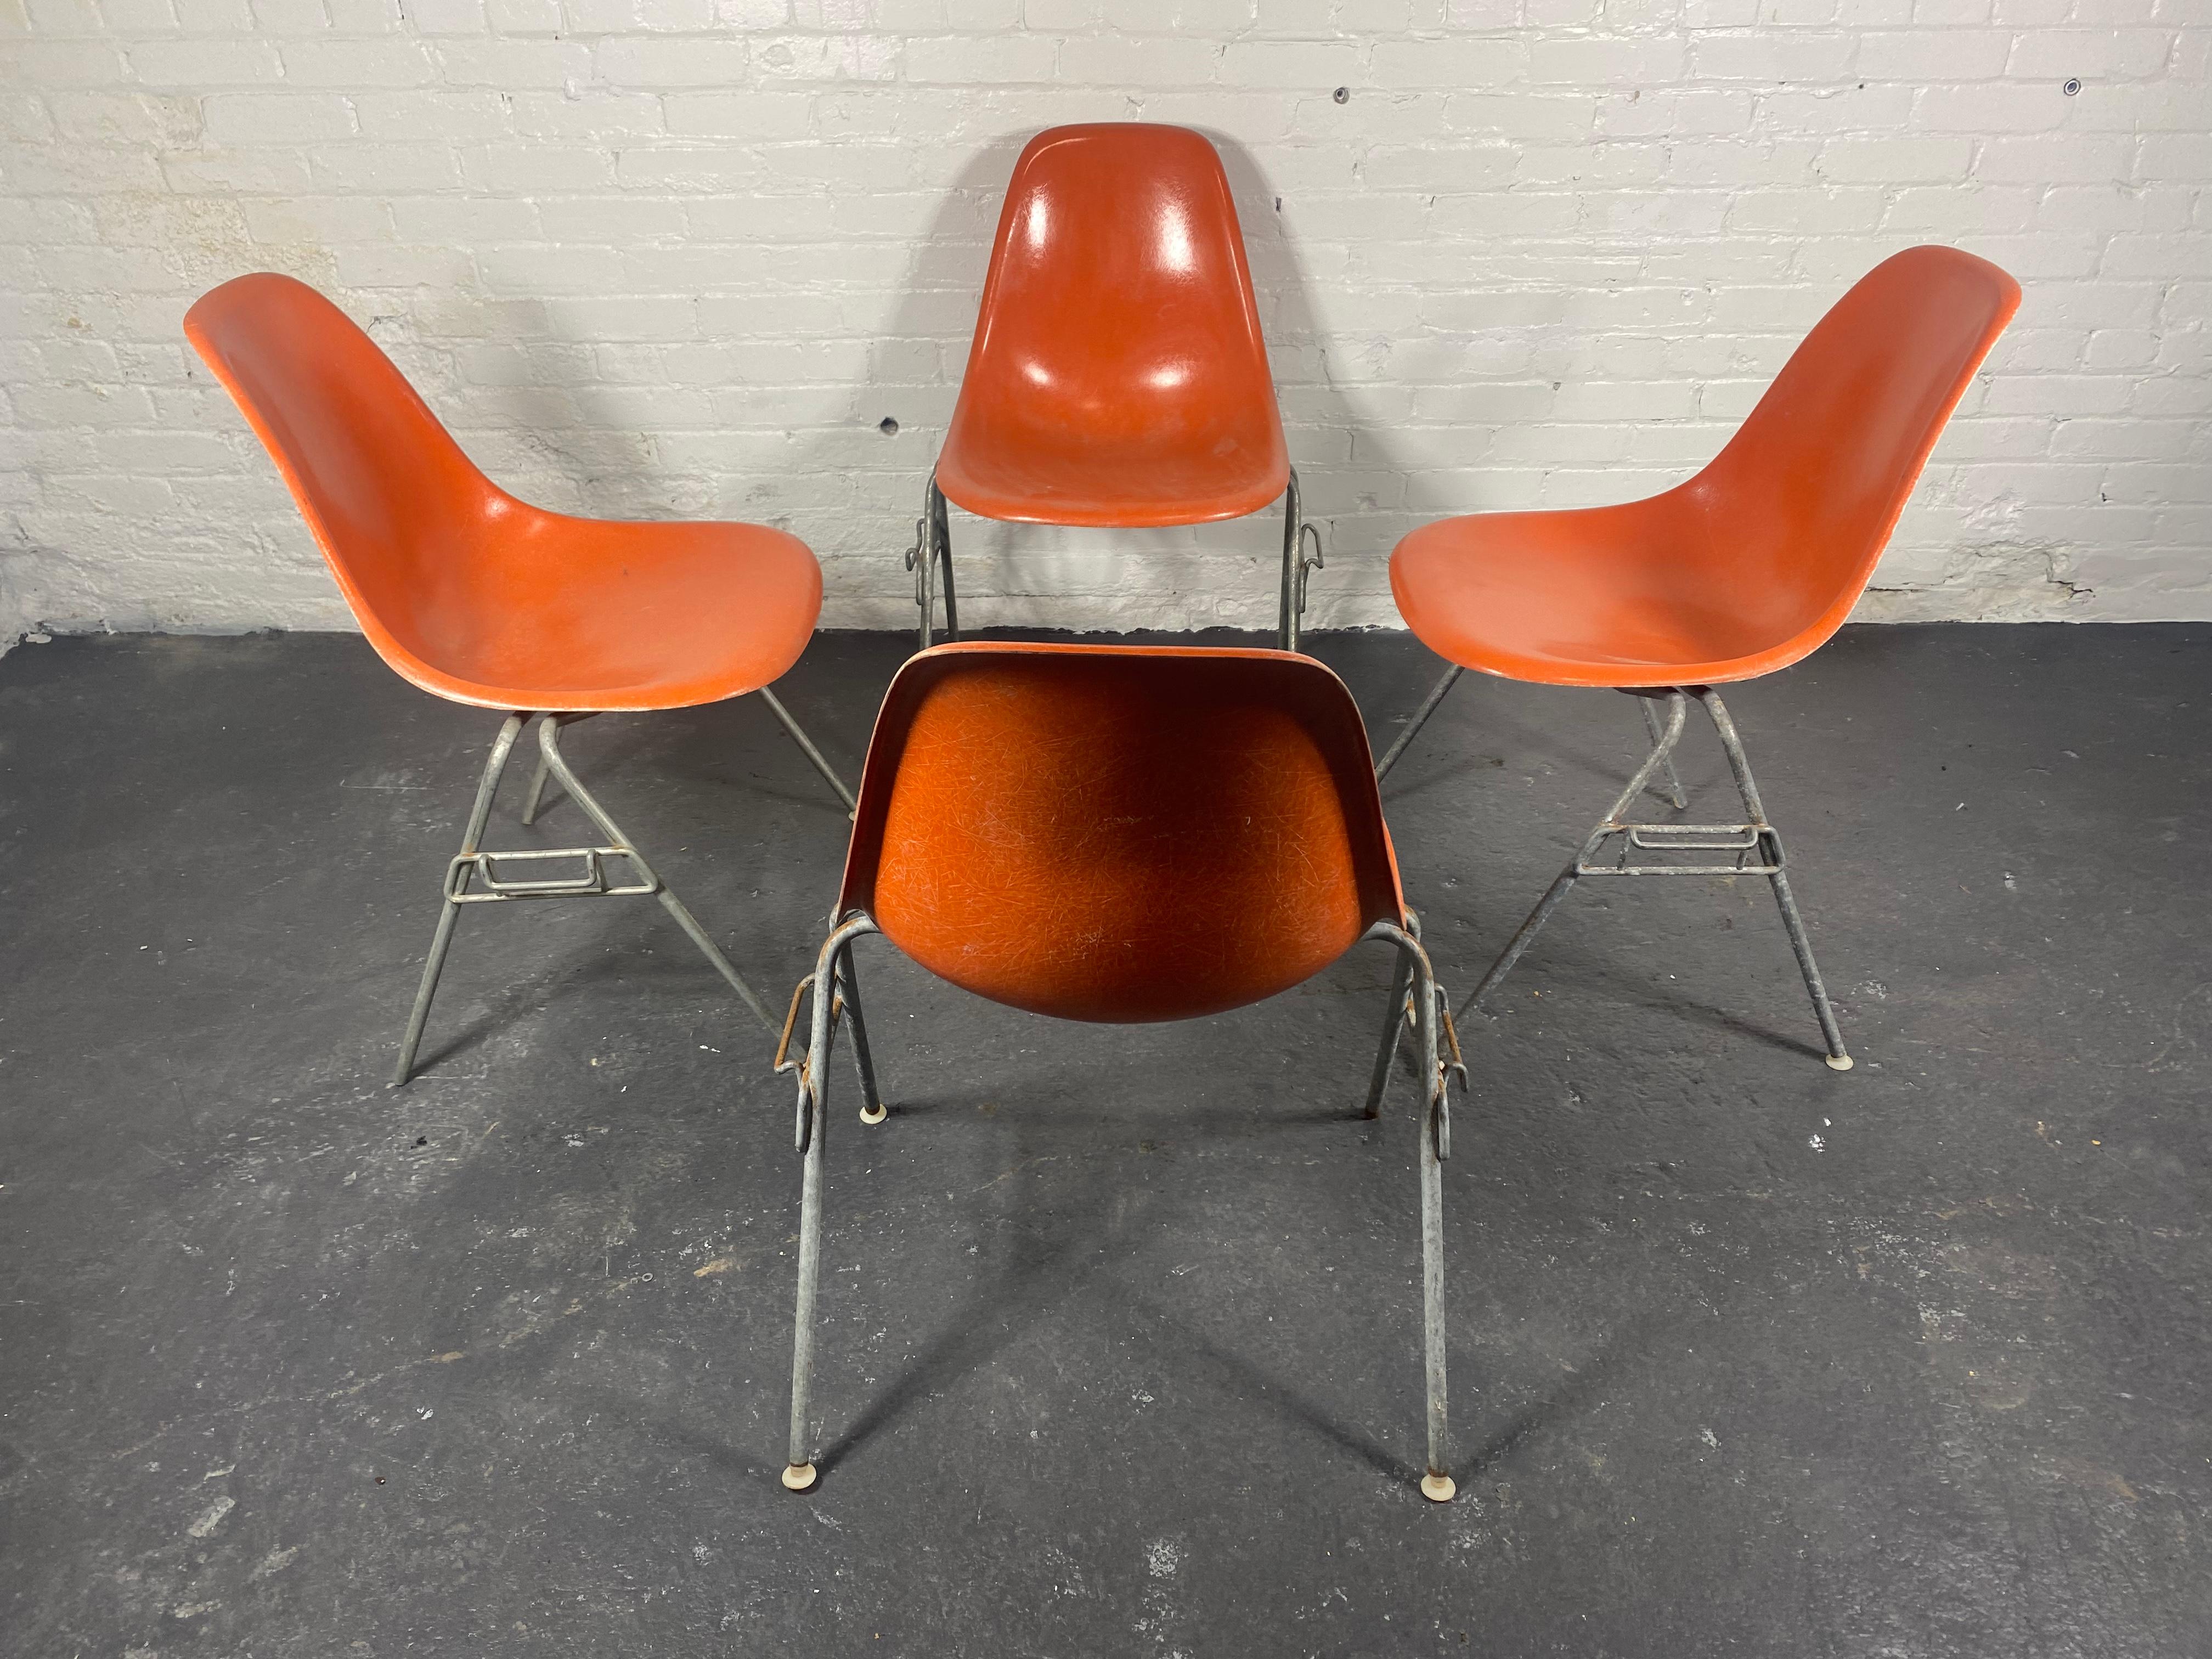 Metal SET 4 DSS Stacking Chairs, Charles & Ray Eames, Herman Miller, Orange Fiberglass For Sale